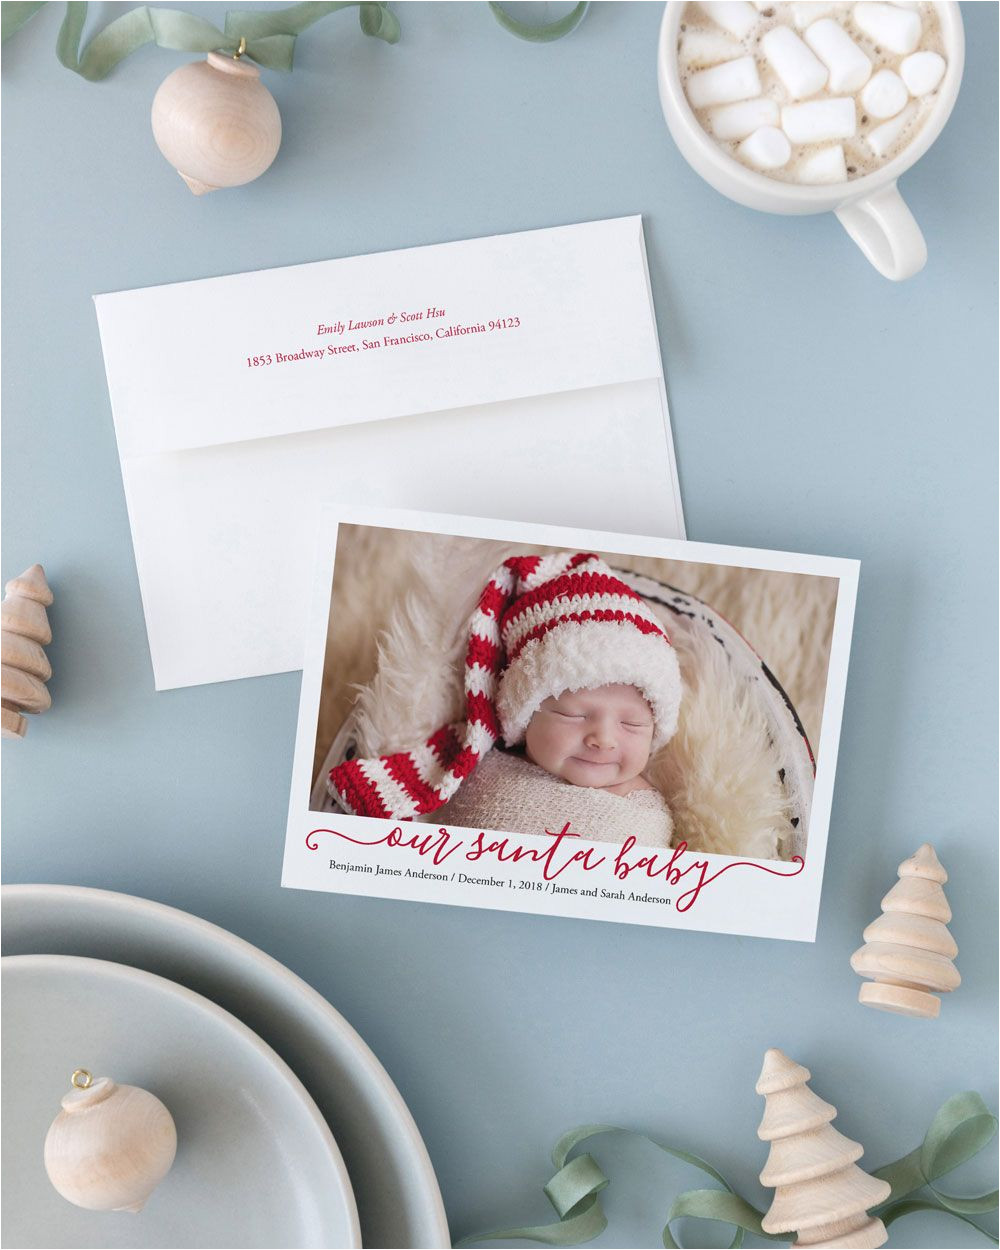 Christmas Card and Birth Announcement Our Santa Baby Holiday Photo Card by Meredith Collie for